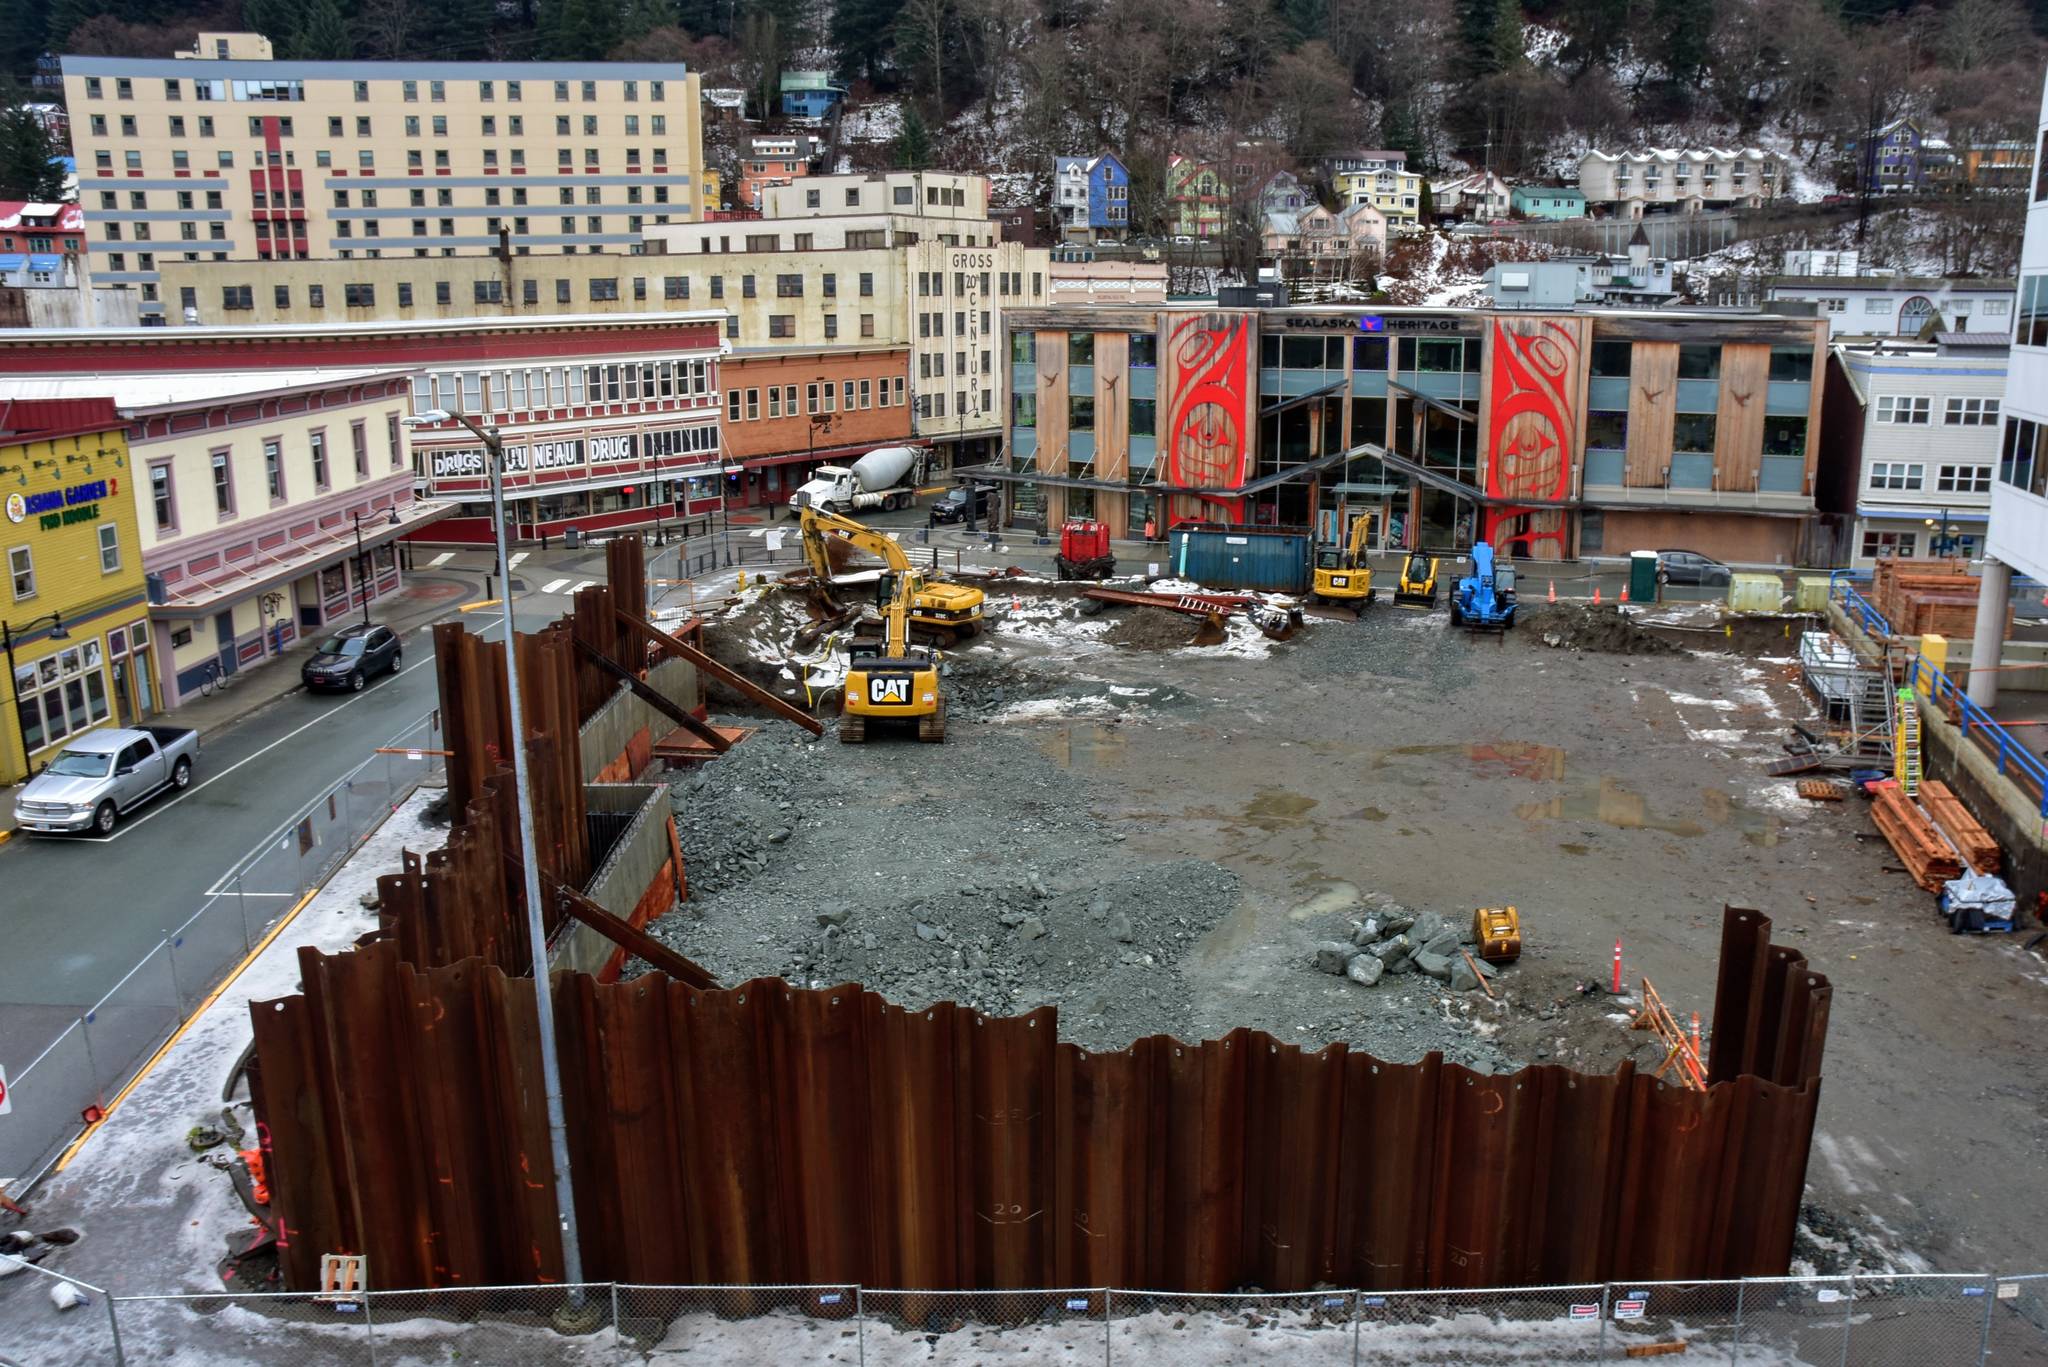 Construction on Sealaska Heritage Institute’s arts campus, seen here on Tuesday, Nov. 24, 2020, in downtown Juneau ran into complications when contaminated soil was discovered at the site. The City and Borough of Juneau Assembly approved $1.5 million in funding for the campus. (Peter Segall / Juneau Empire)